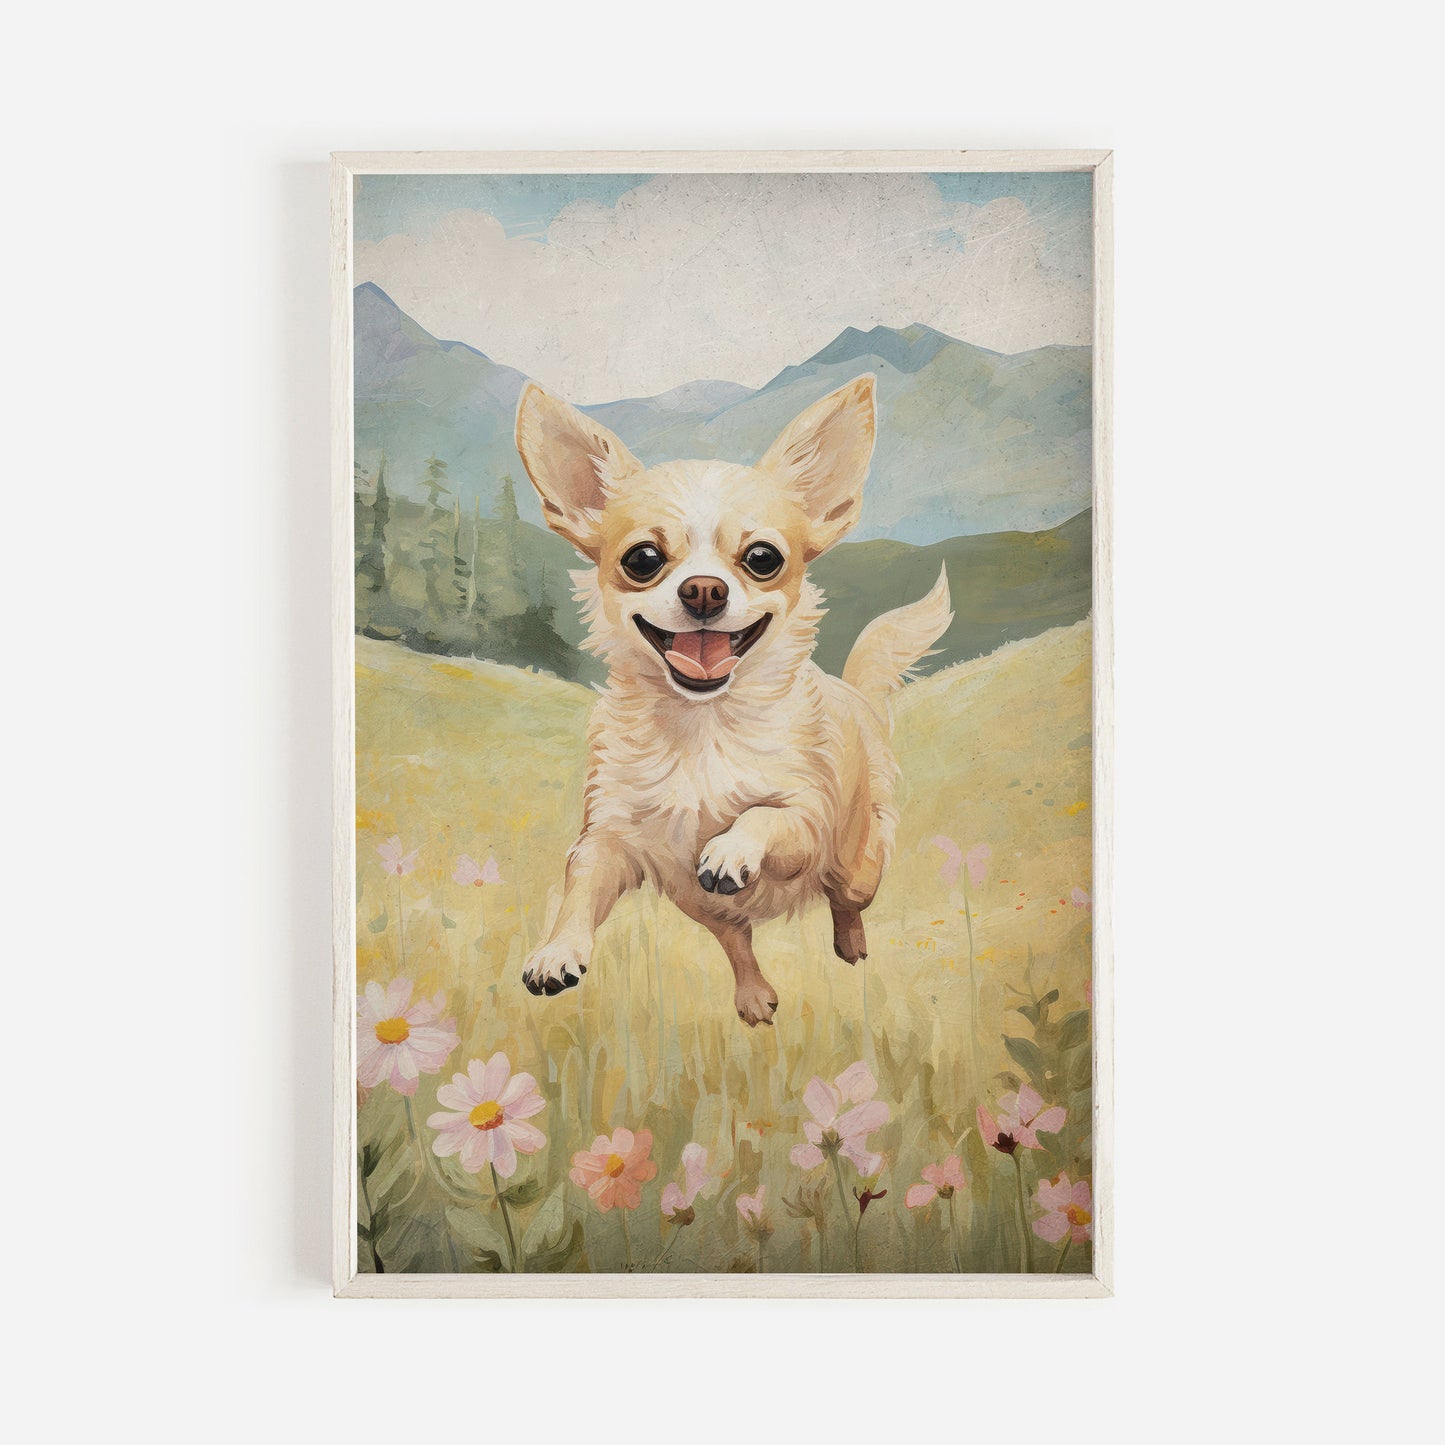 Chihuahua Print, Vintage Dog Decor, Running Dog Portrait, Dogs and Flowers, DIGITAL Printable Art for Chihuahua Lovers & Owners